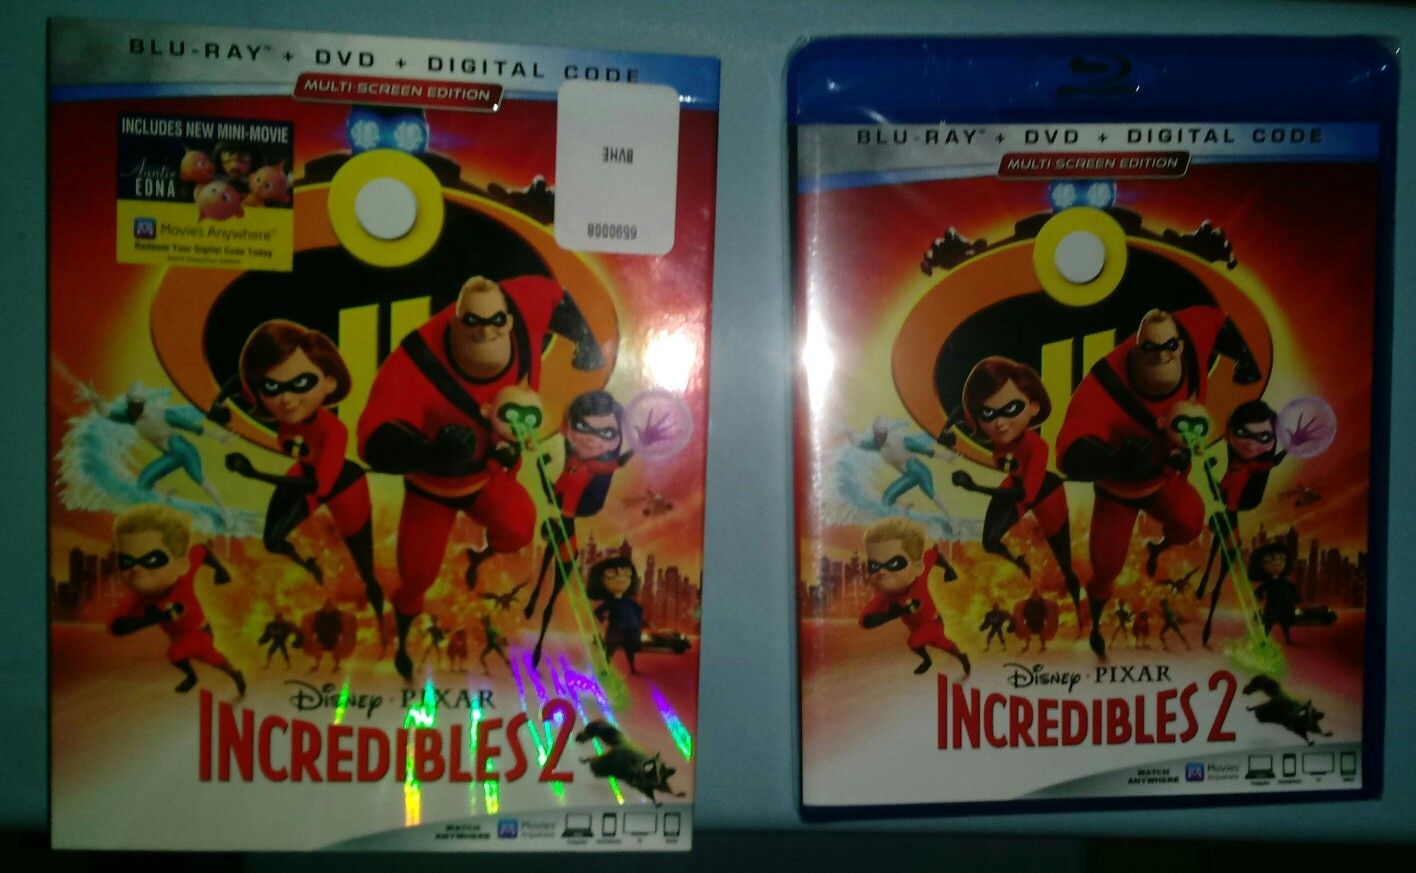 The Incredibles 2 brand new un-opened Blu-Ray + DVD + Digital cody combo pack